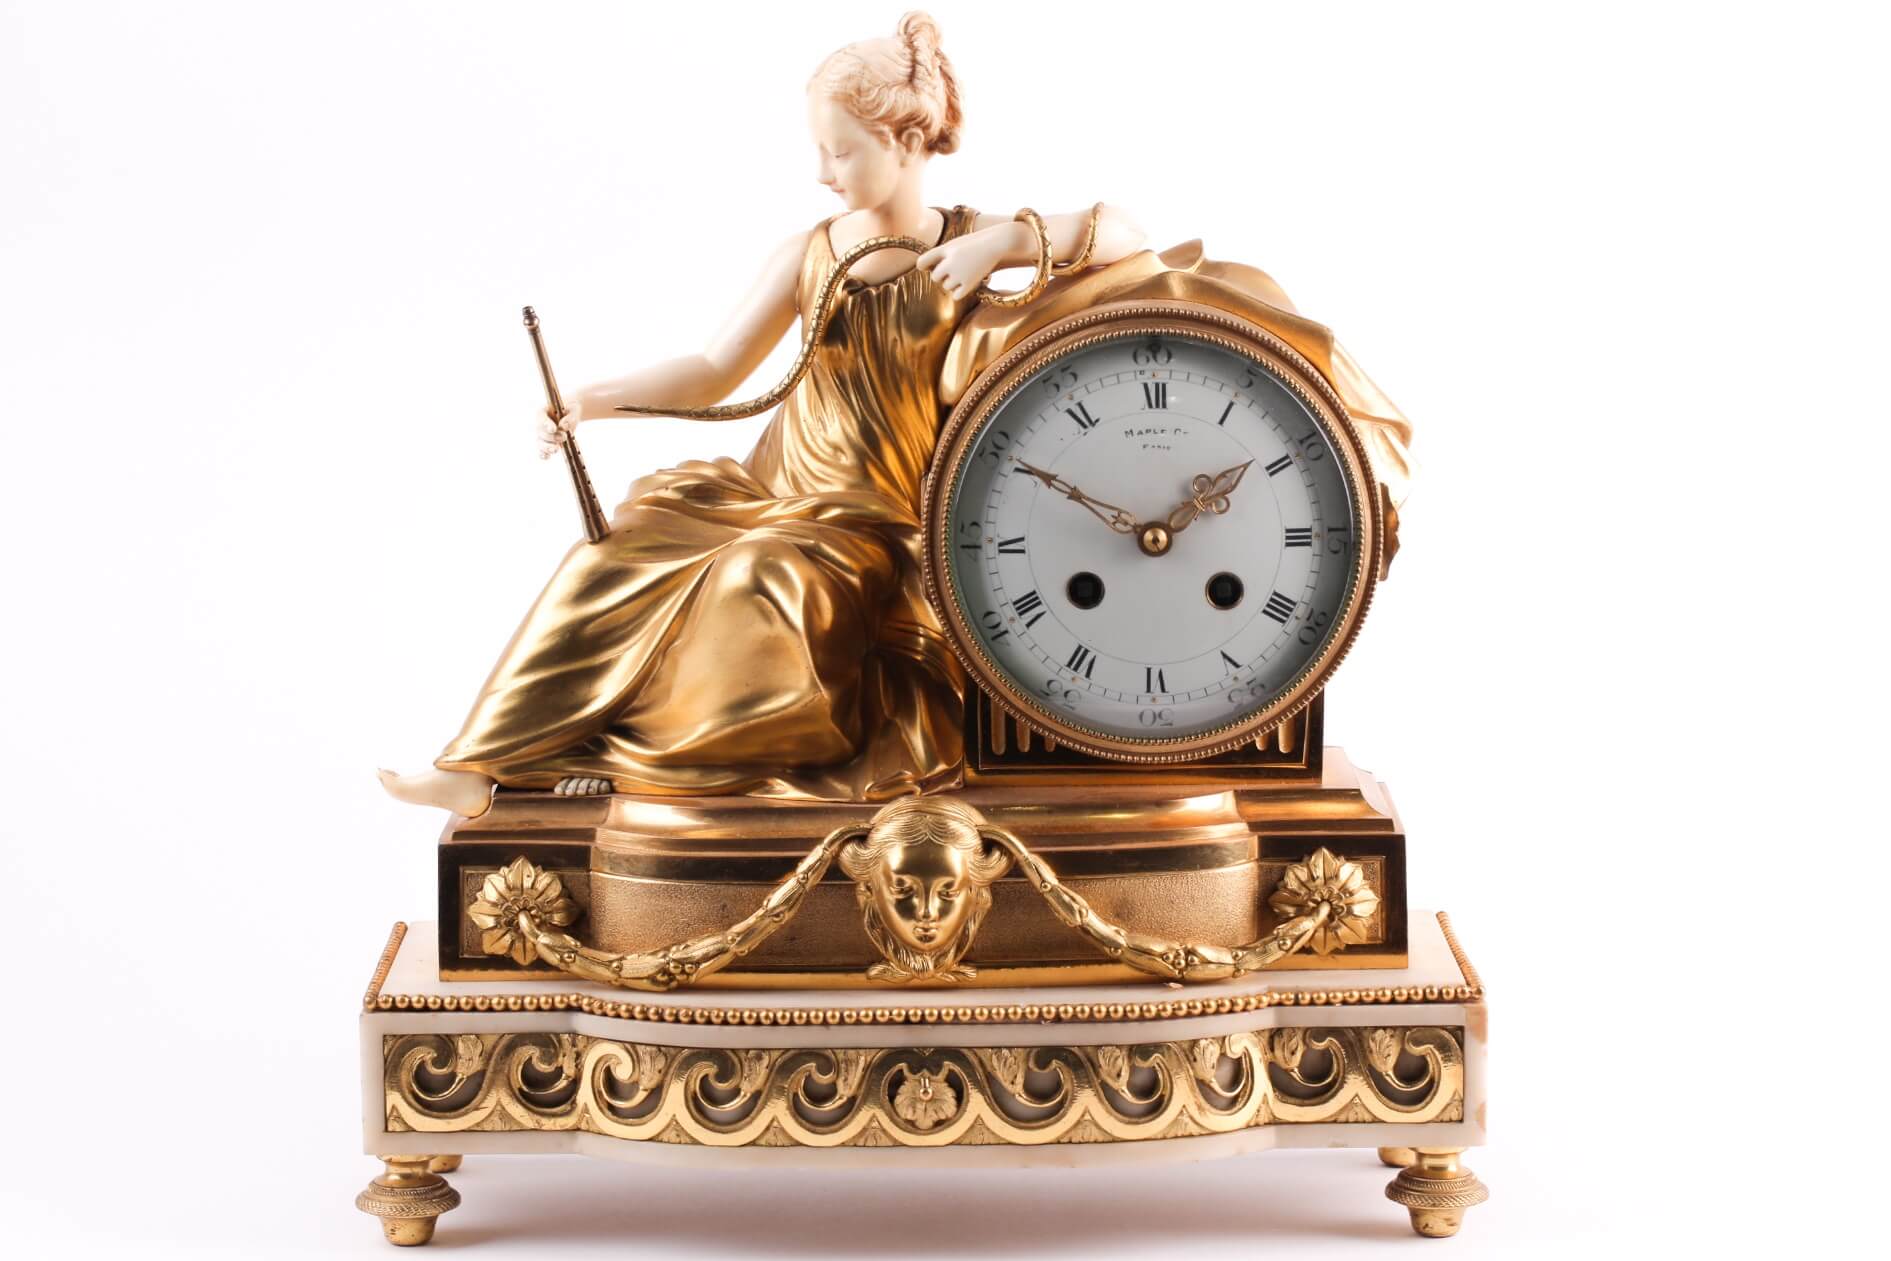 A fine and unusual 19th-century white marble, ivory and ormolu mantel clock